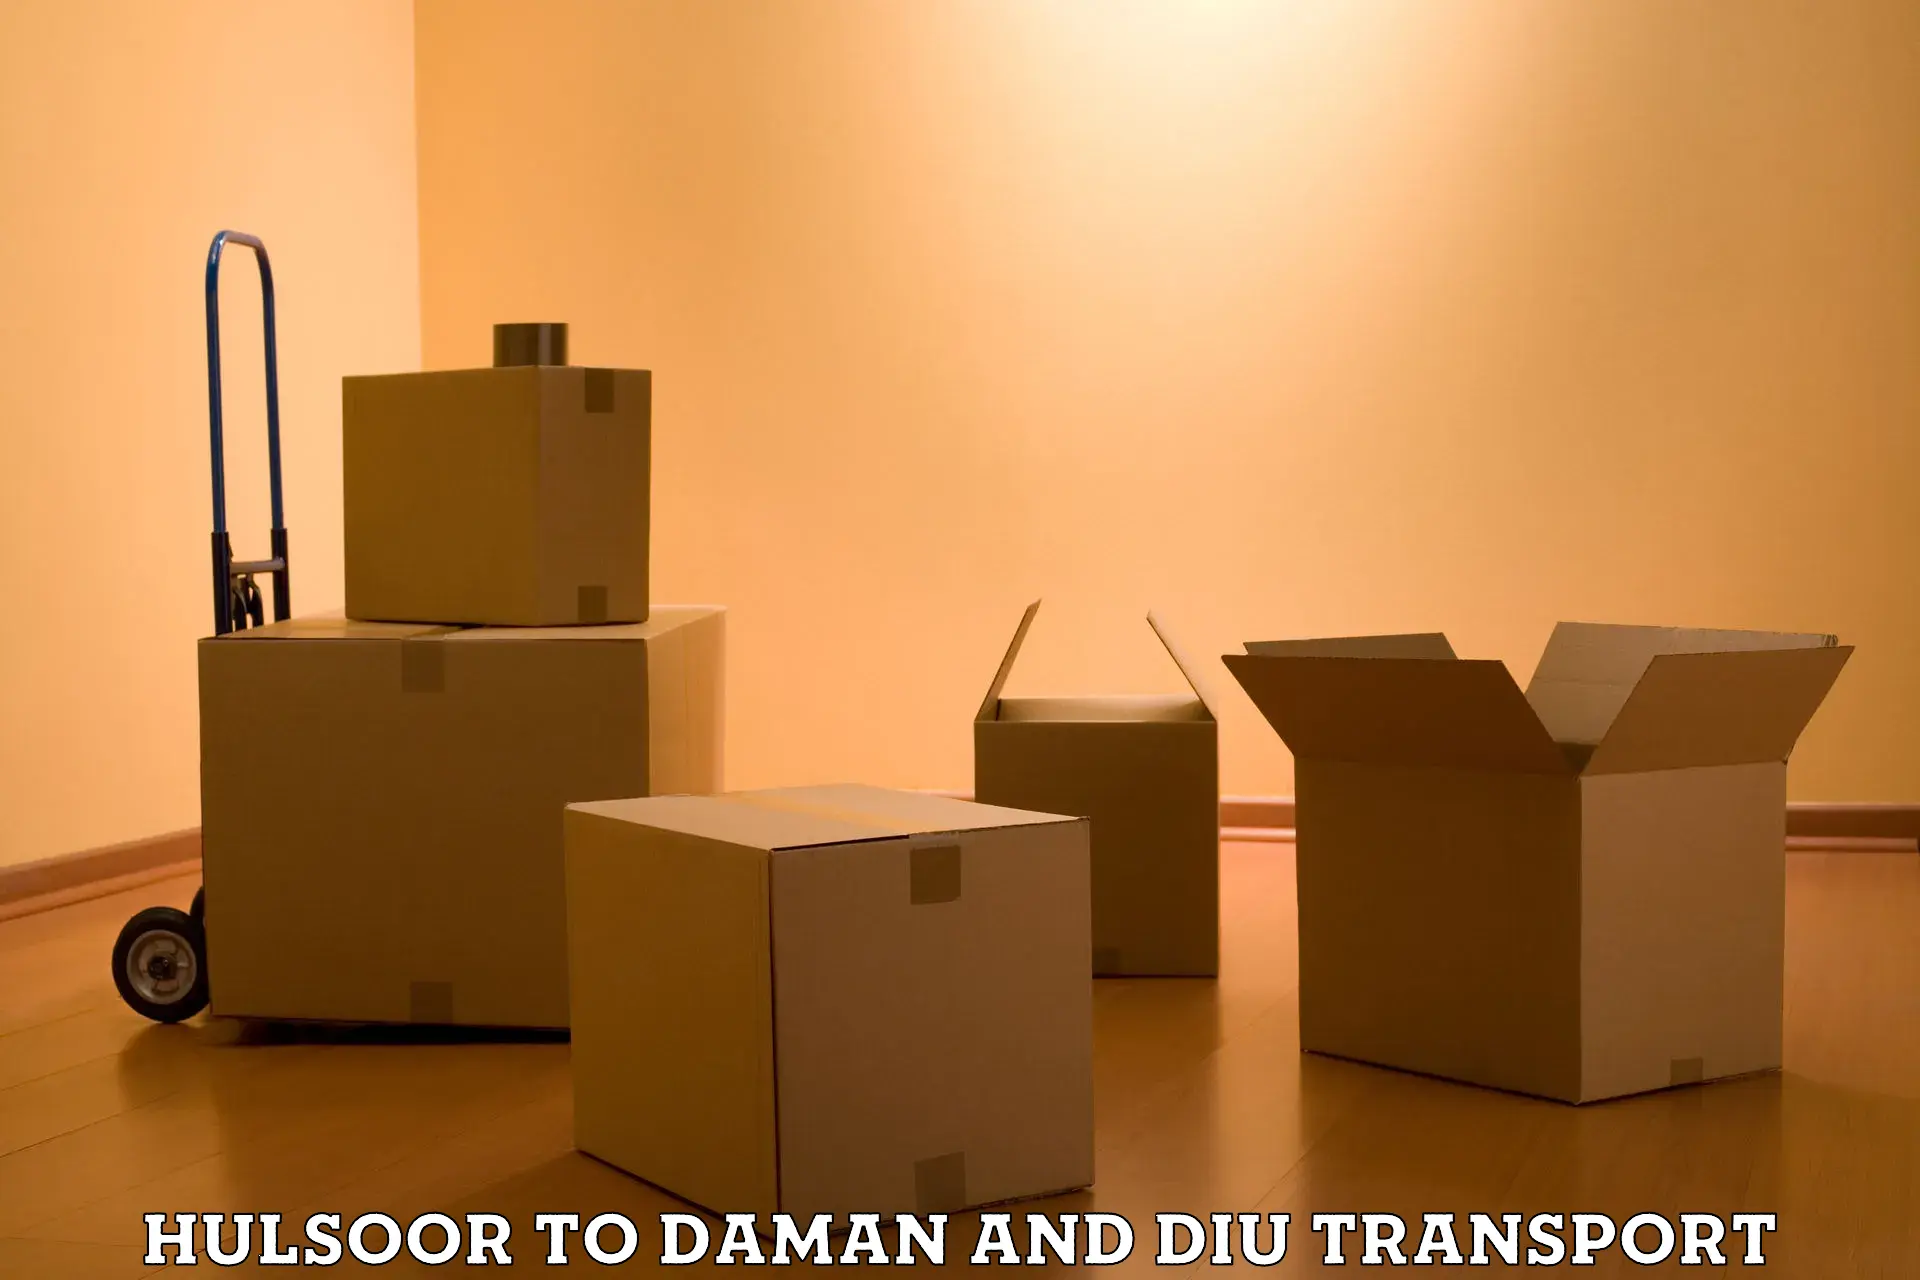 Container transport service Hulsoor to Daman